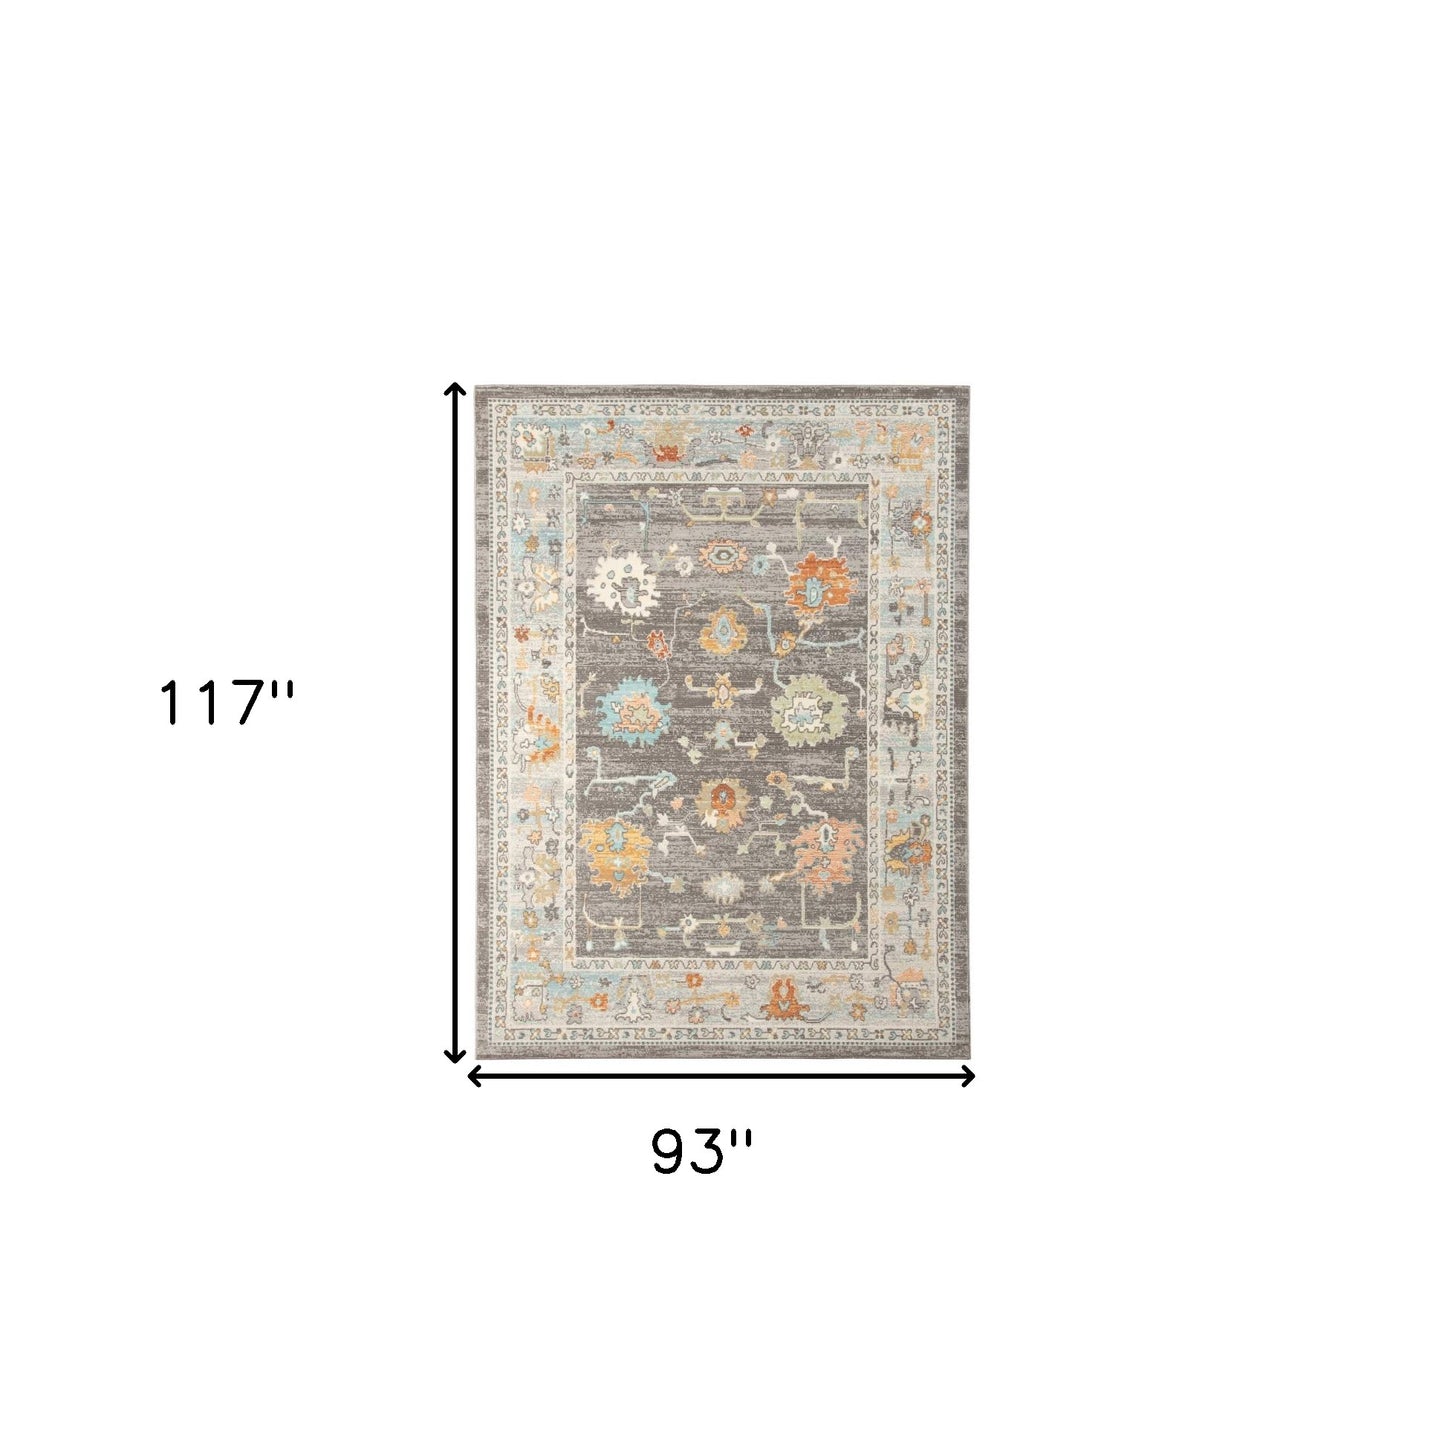 5' x 7' Blue and Orange Floral Stain Resistant Indoor Outdoor Area Rug